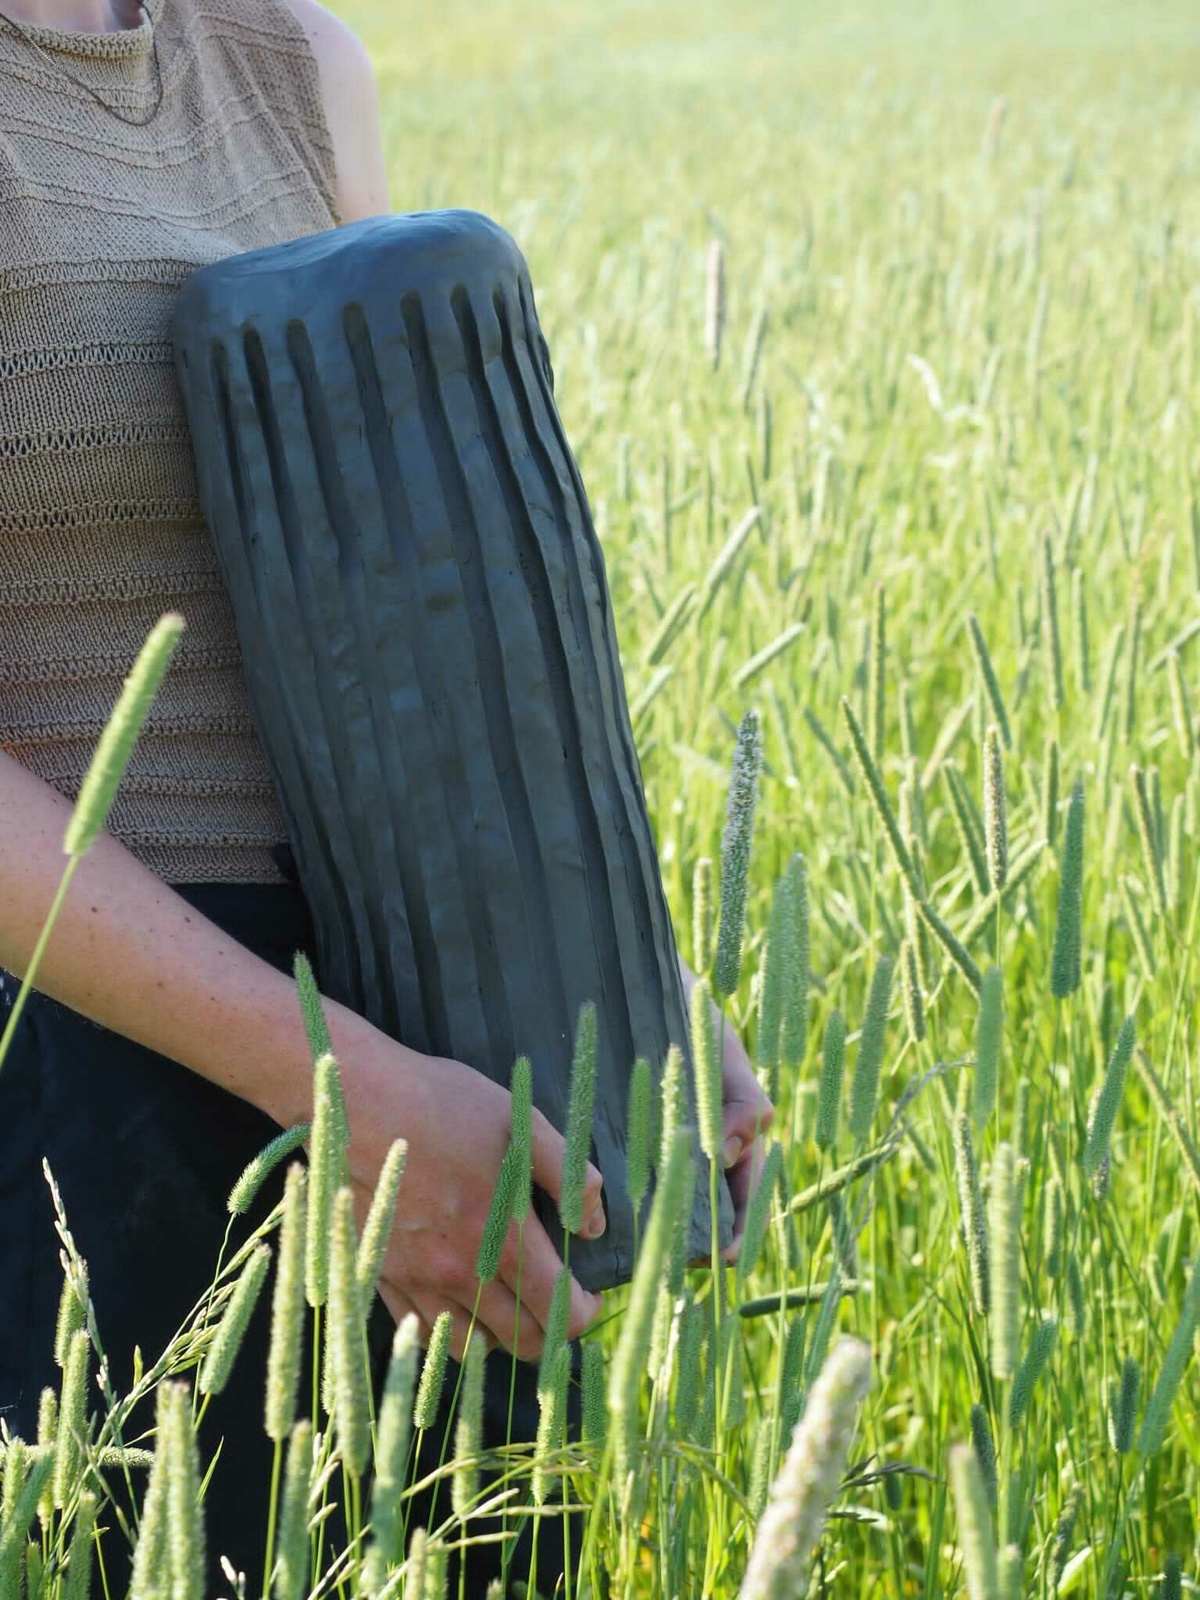 A photo of someone holding an un-baked clay column in a field of tall grass